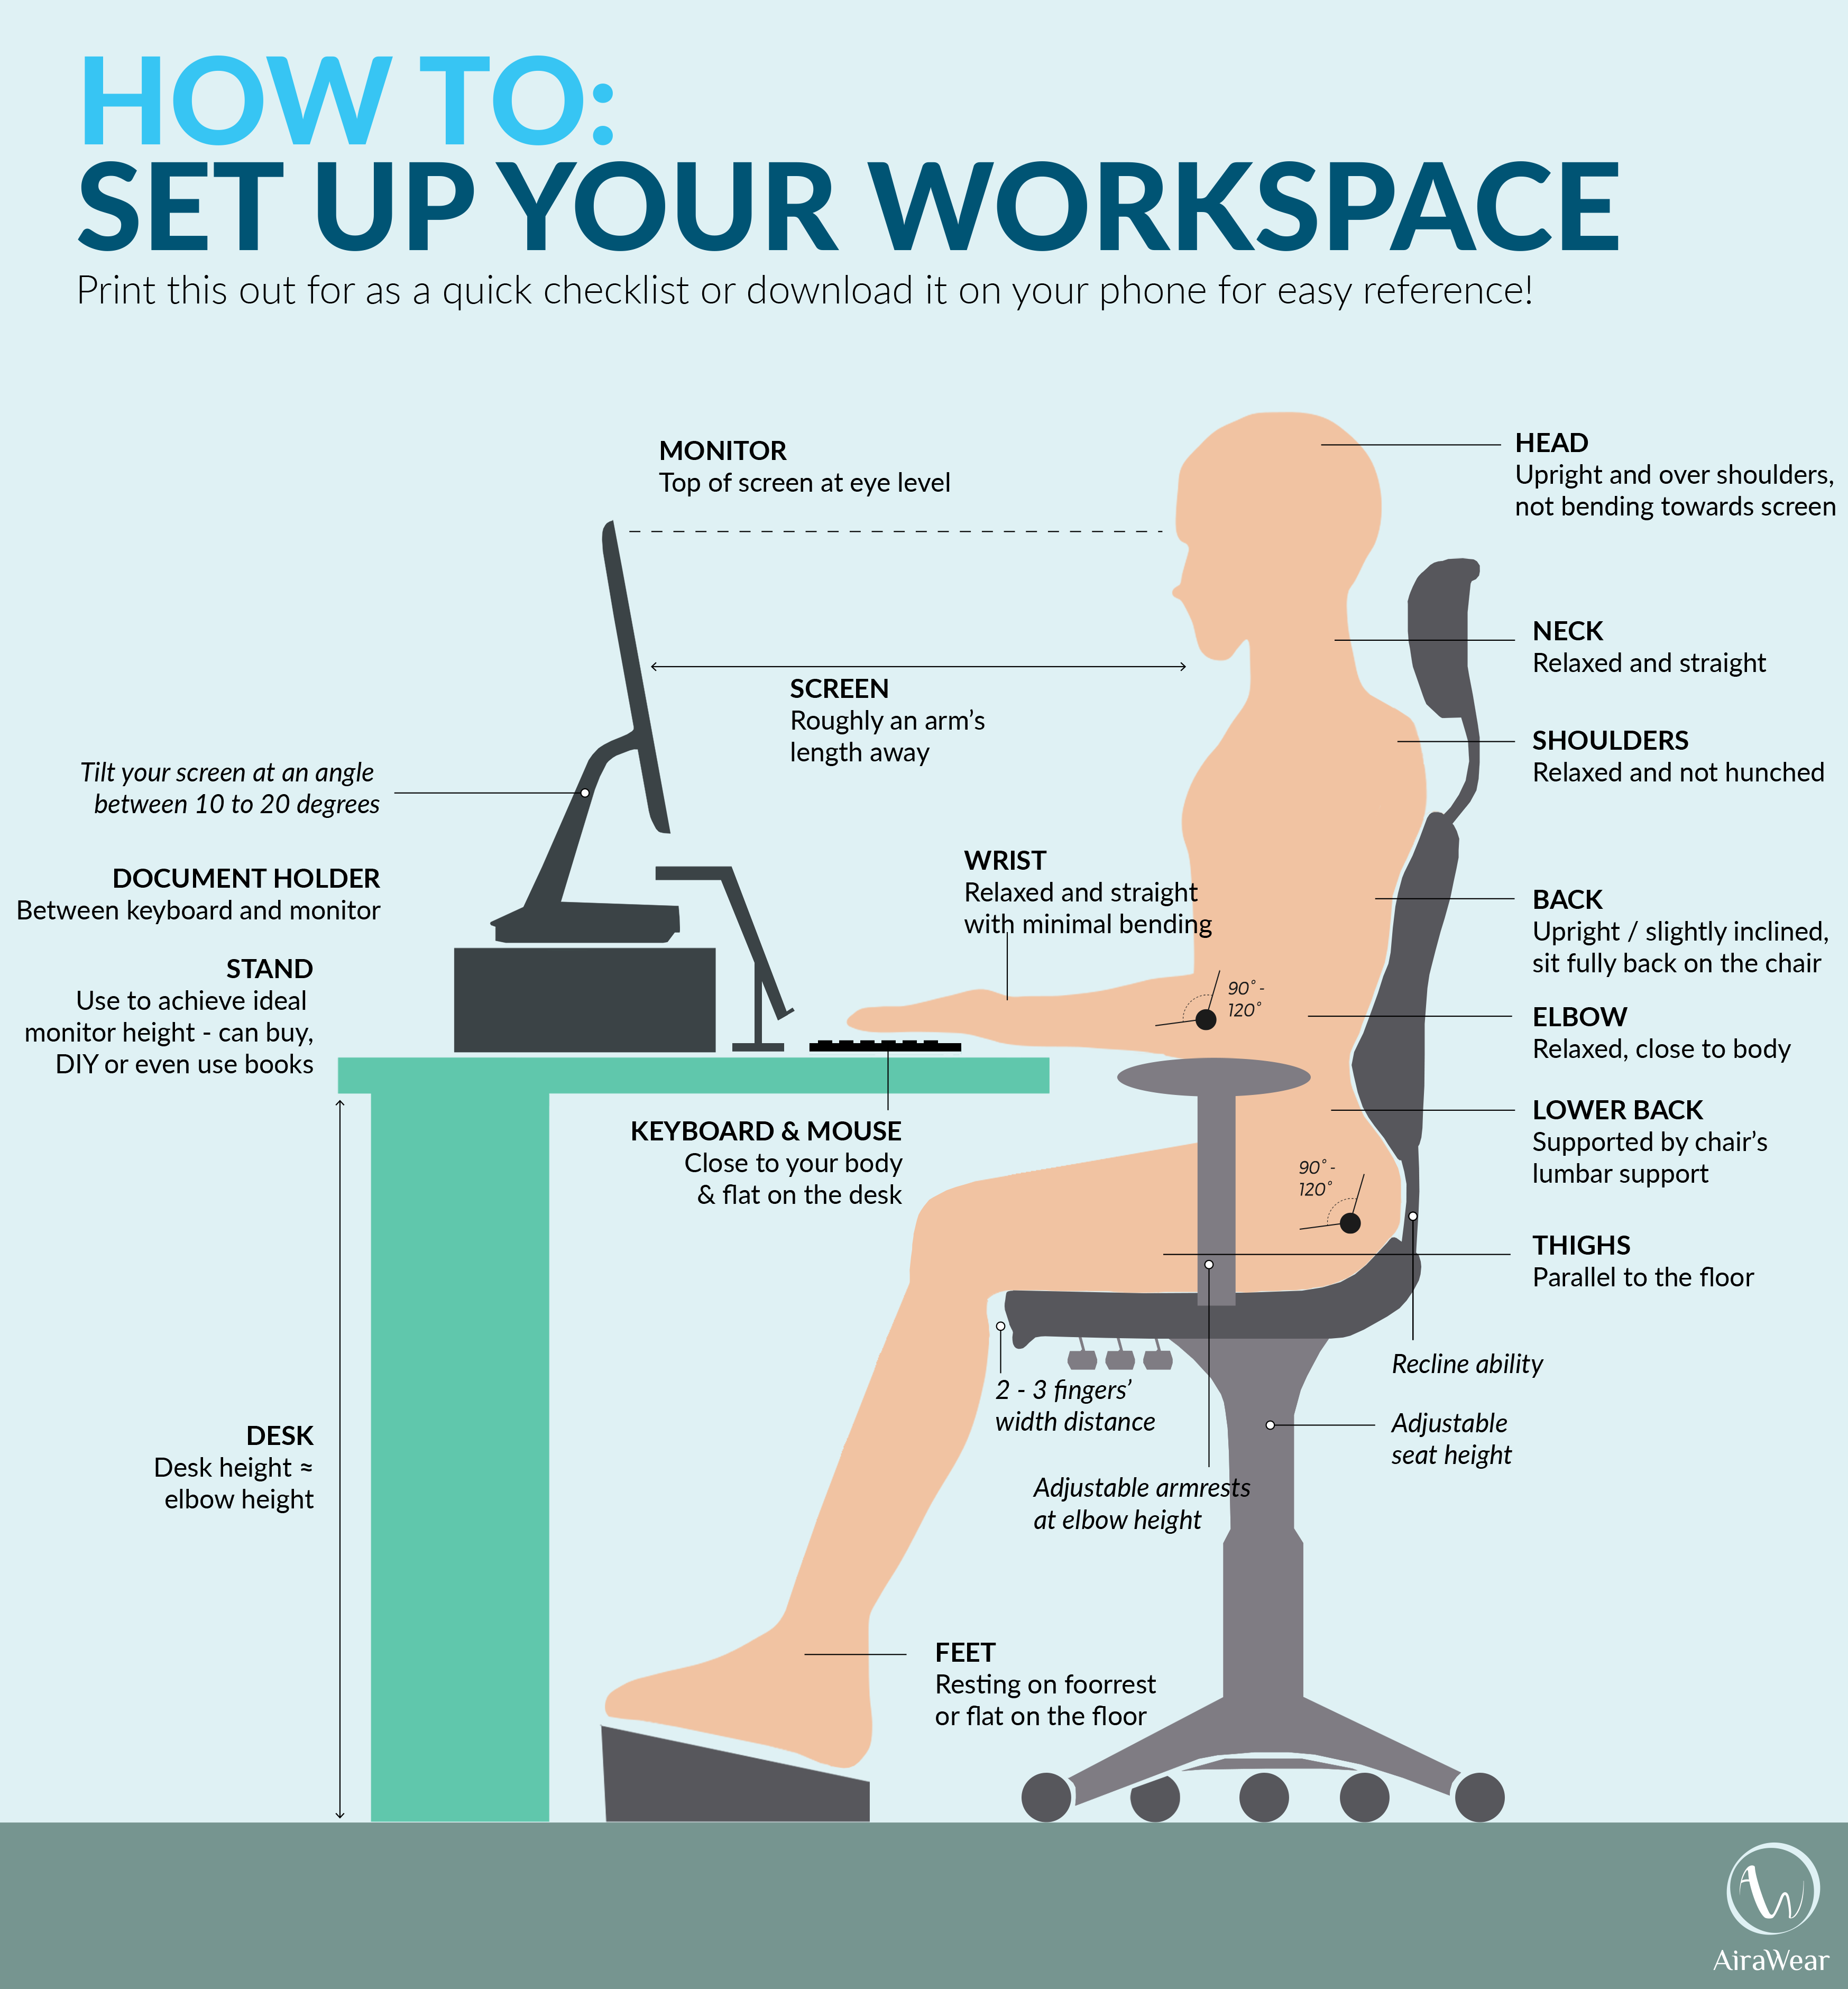 How can you improve your posture? - Chiropractor Bendigo - Chiropractic Care